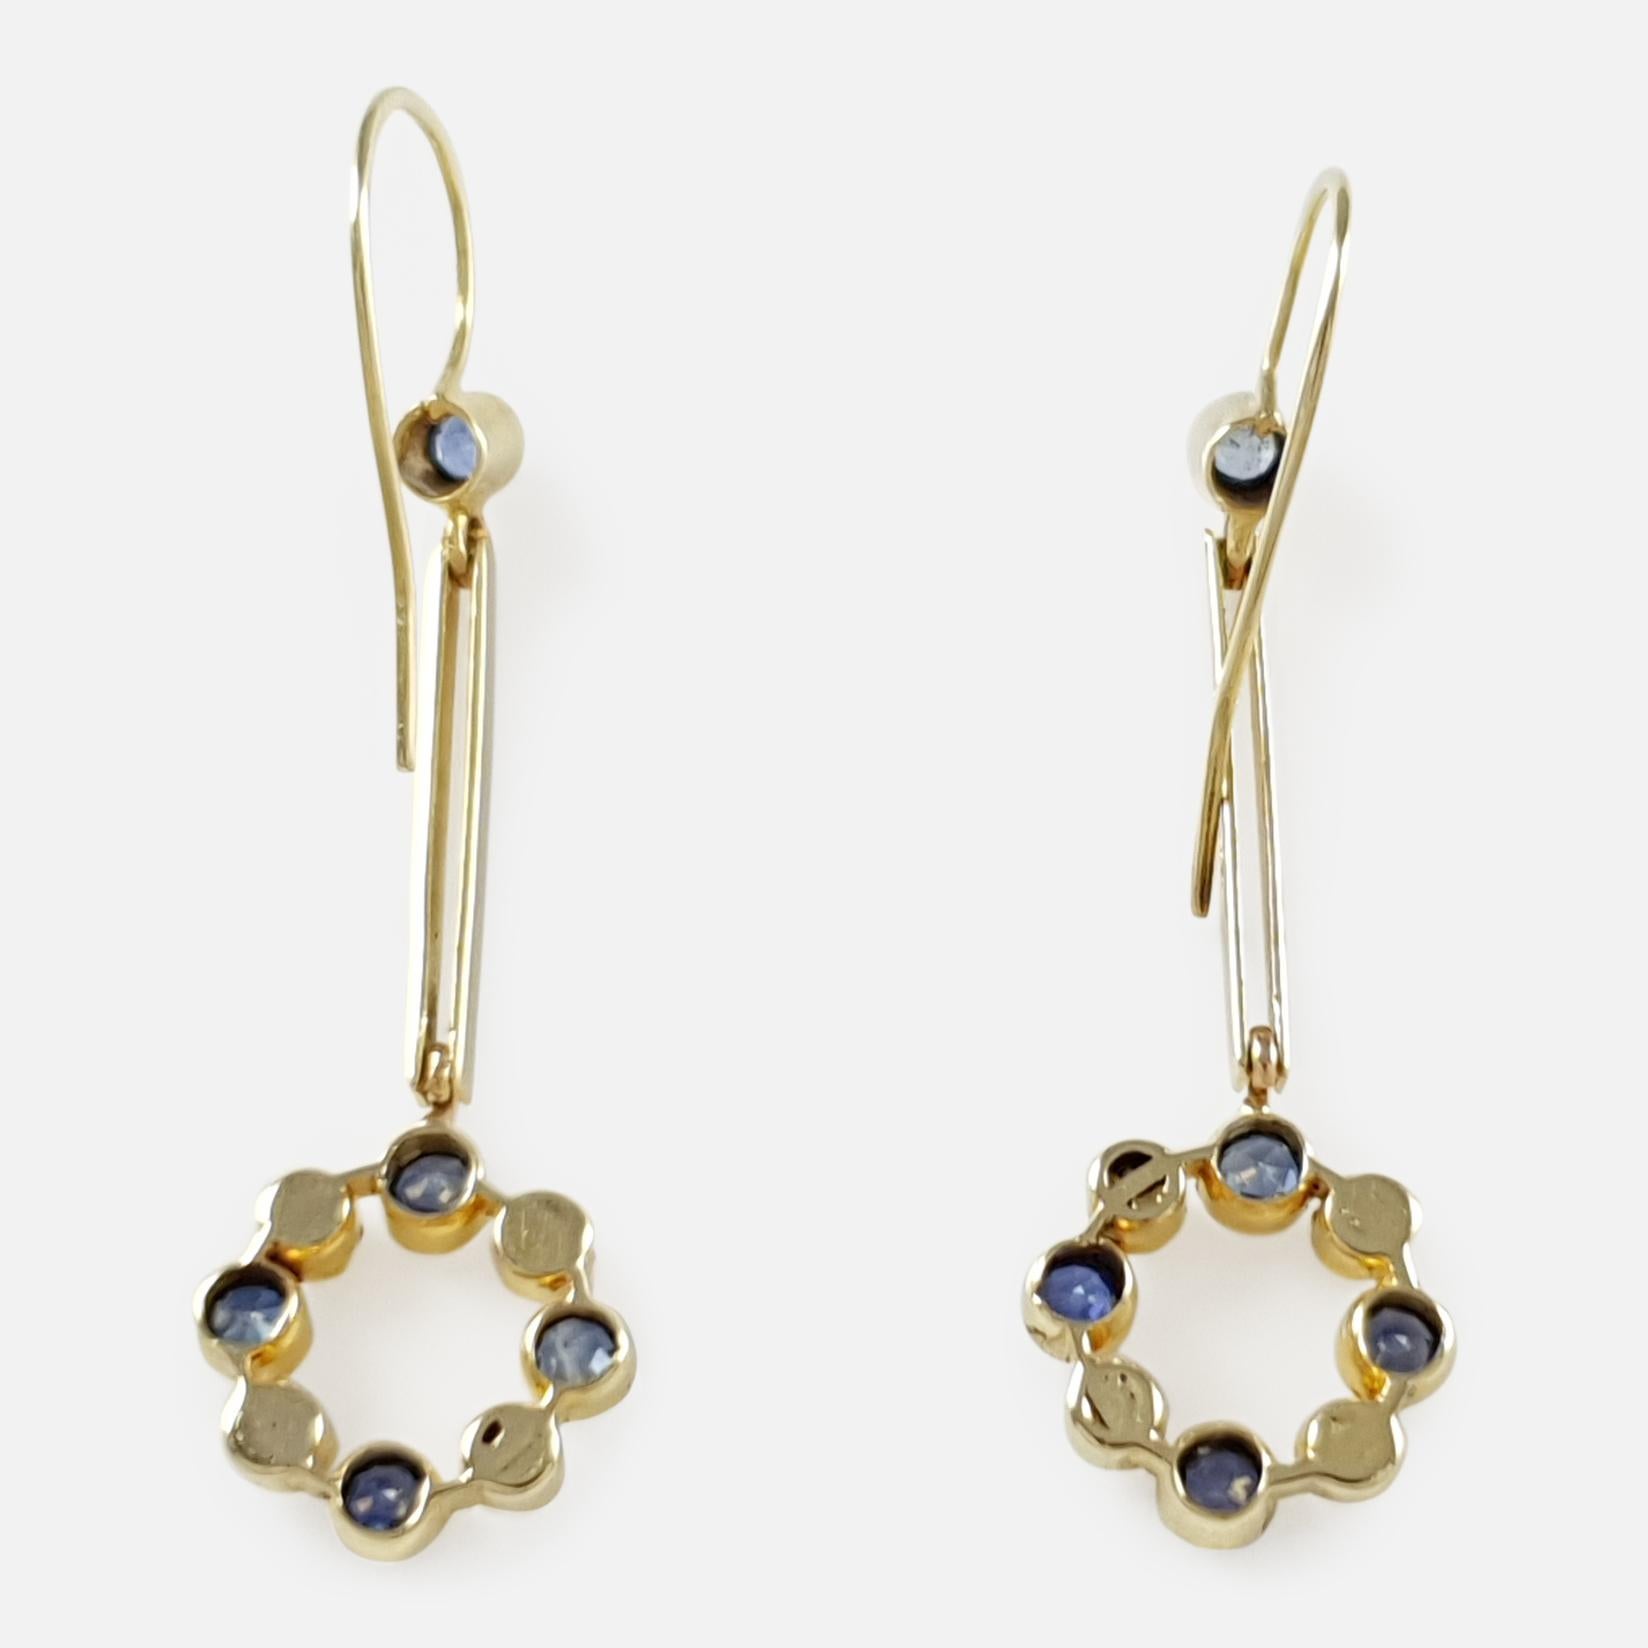 Cased 15 Karat Gold Sapphire and Seed Pearl Pendant Drop Earrings 6